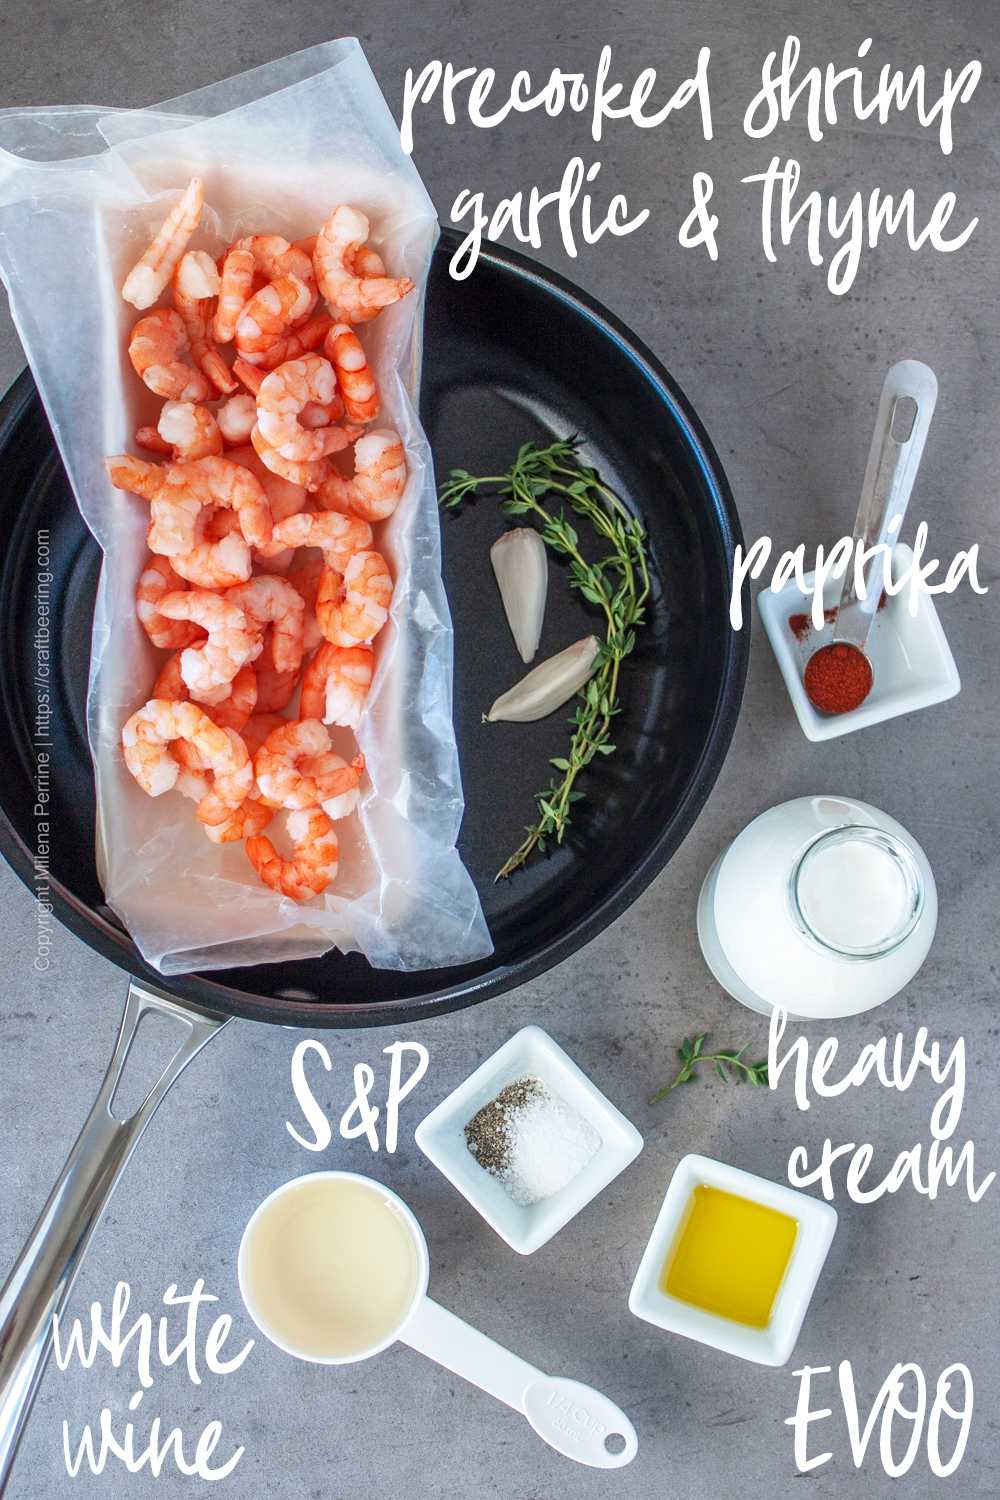 Precooked small shrimp, heavy cream and other ingredients for shrimp cream sauce.